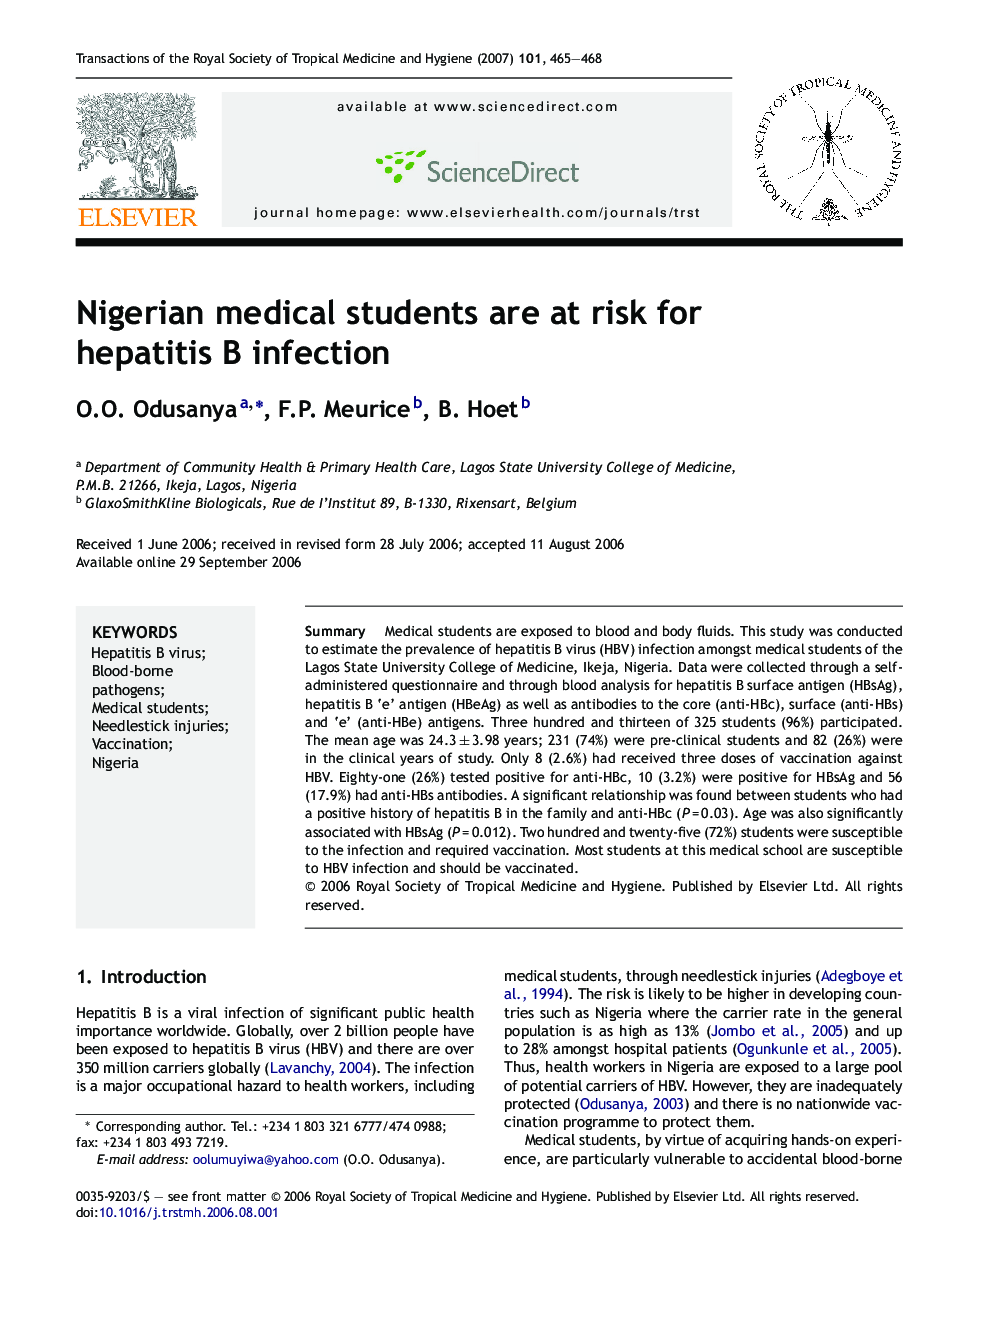 Nigerian medical students are at risk for hepatitis B infection